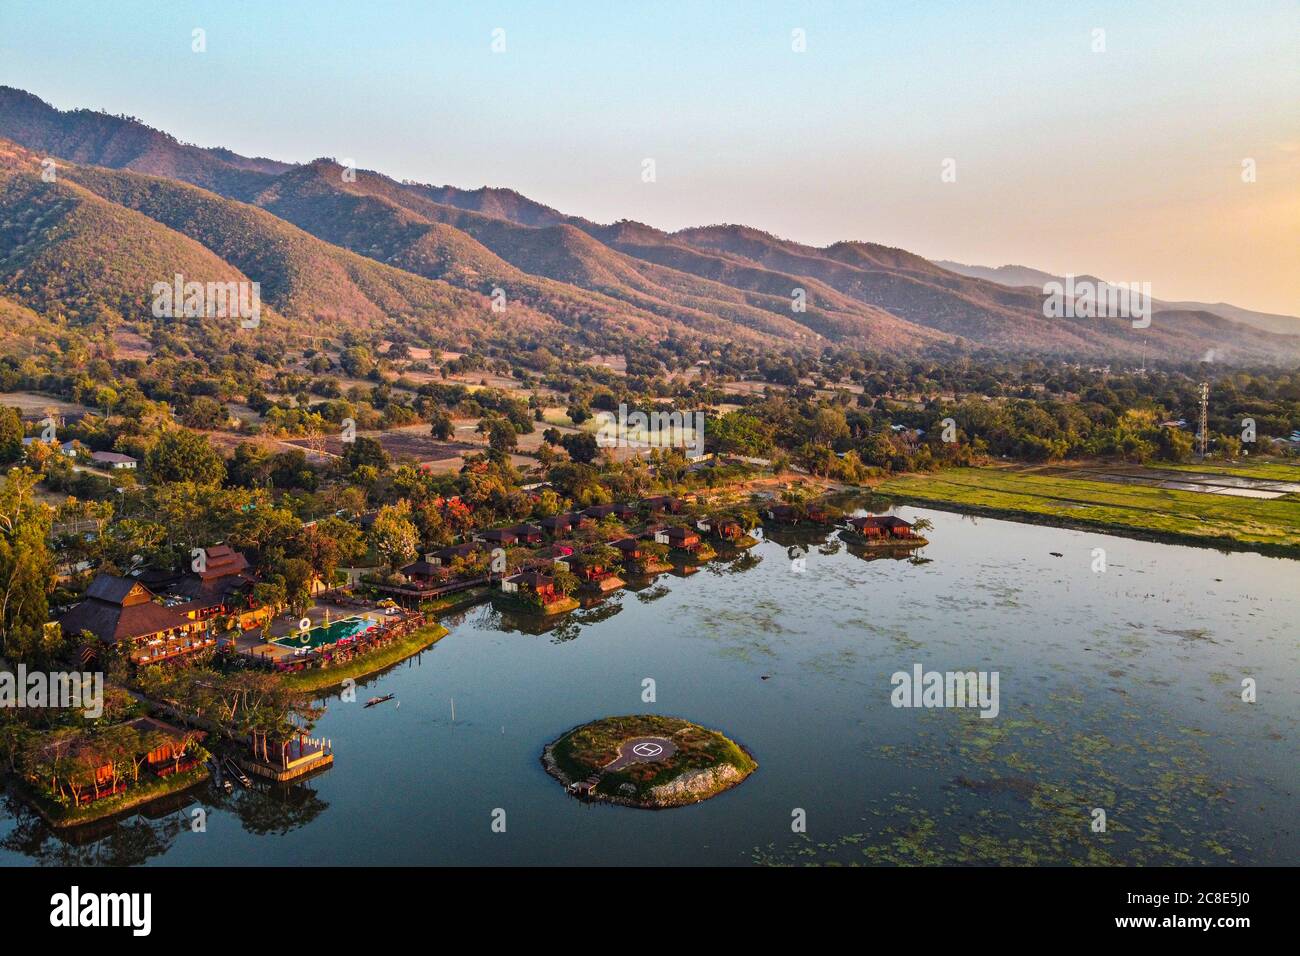 Myanmar, Shan State, Nyaungshwe Township, Aerial view of town on shore of Inle lake at dusk Stock Photo